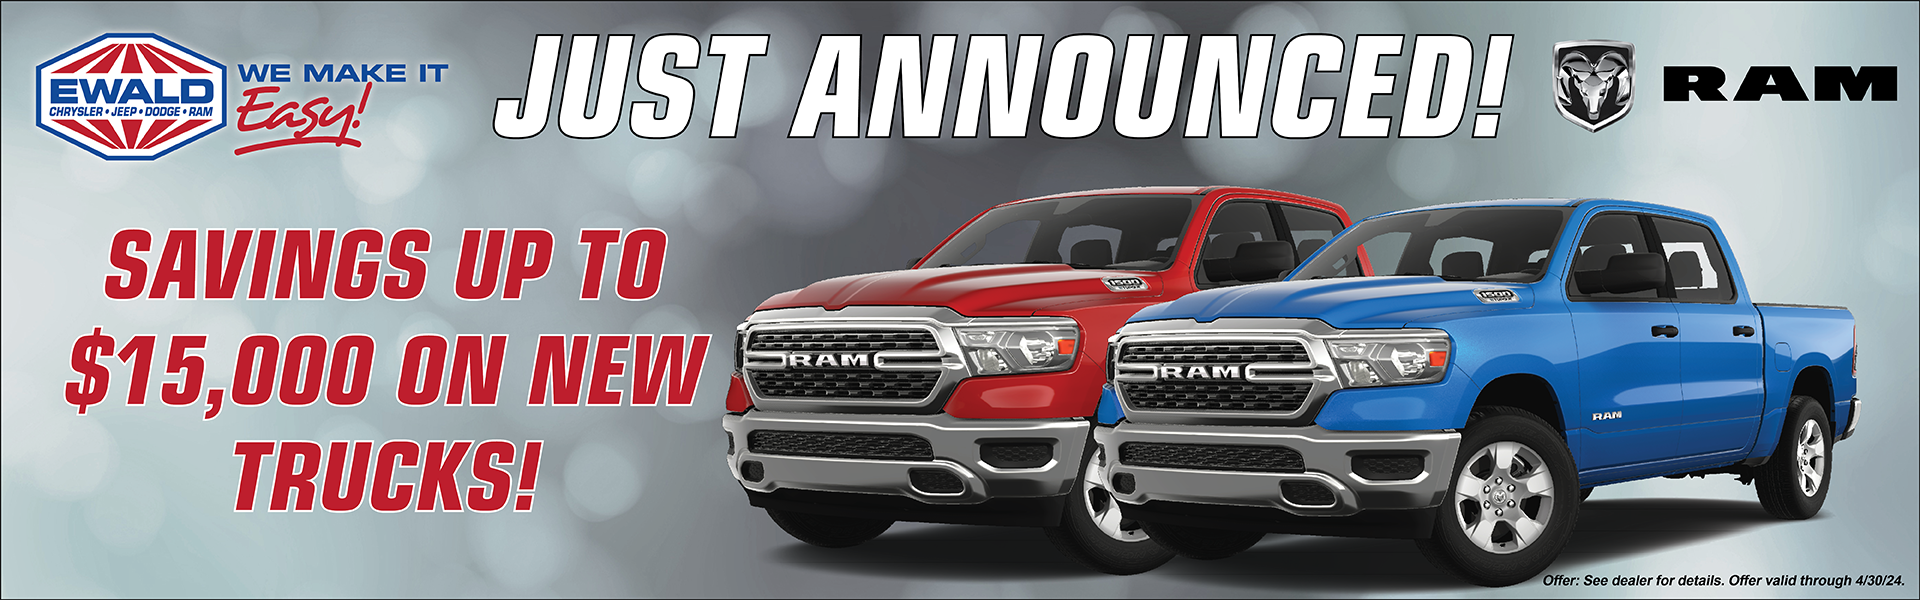 Save up to $15,000 on New Trucks!